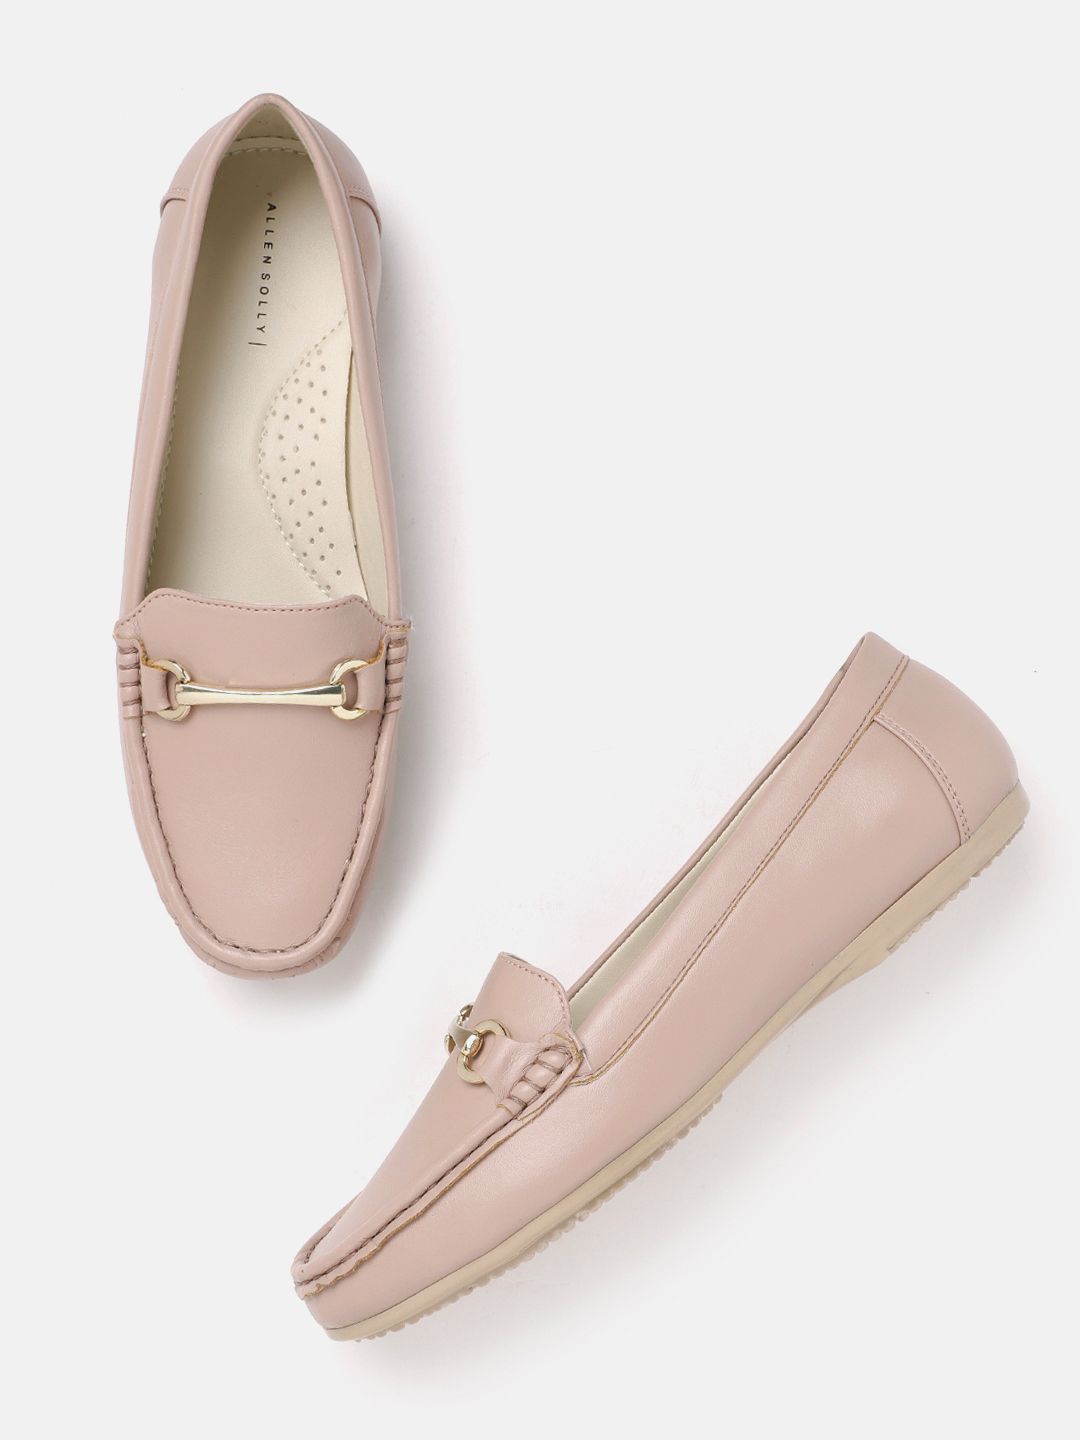 Allen Solly Women Loafers Price in India